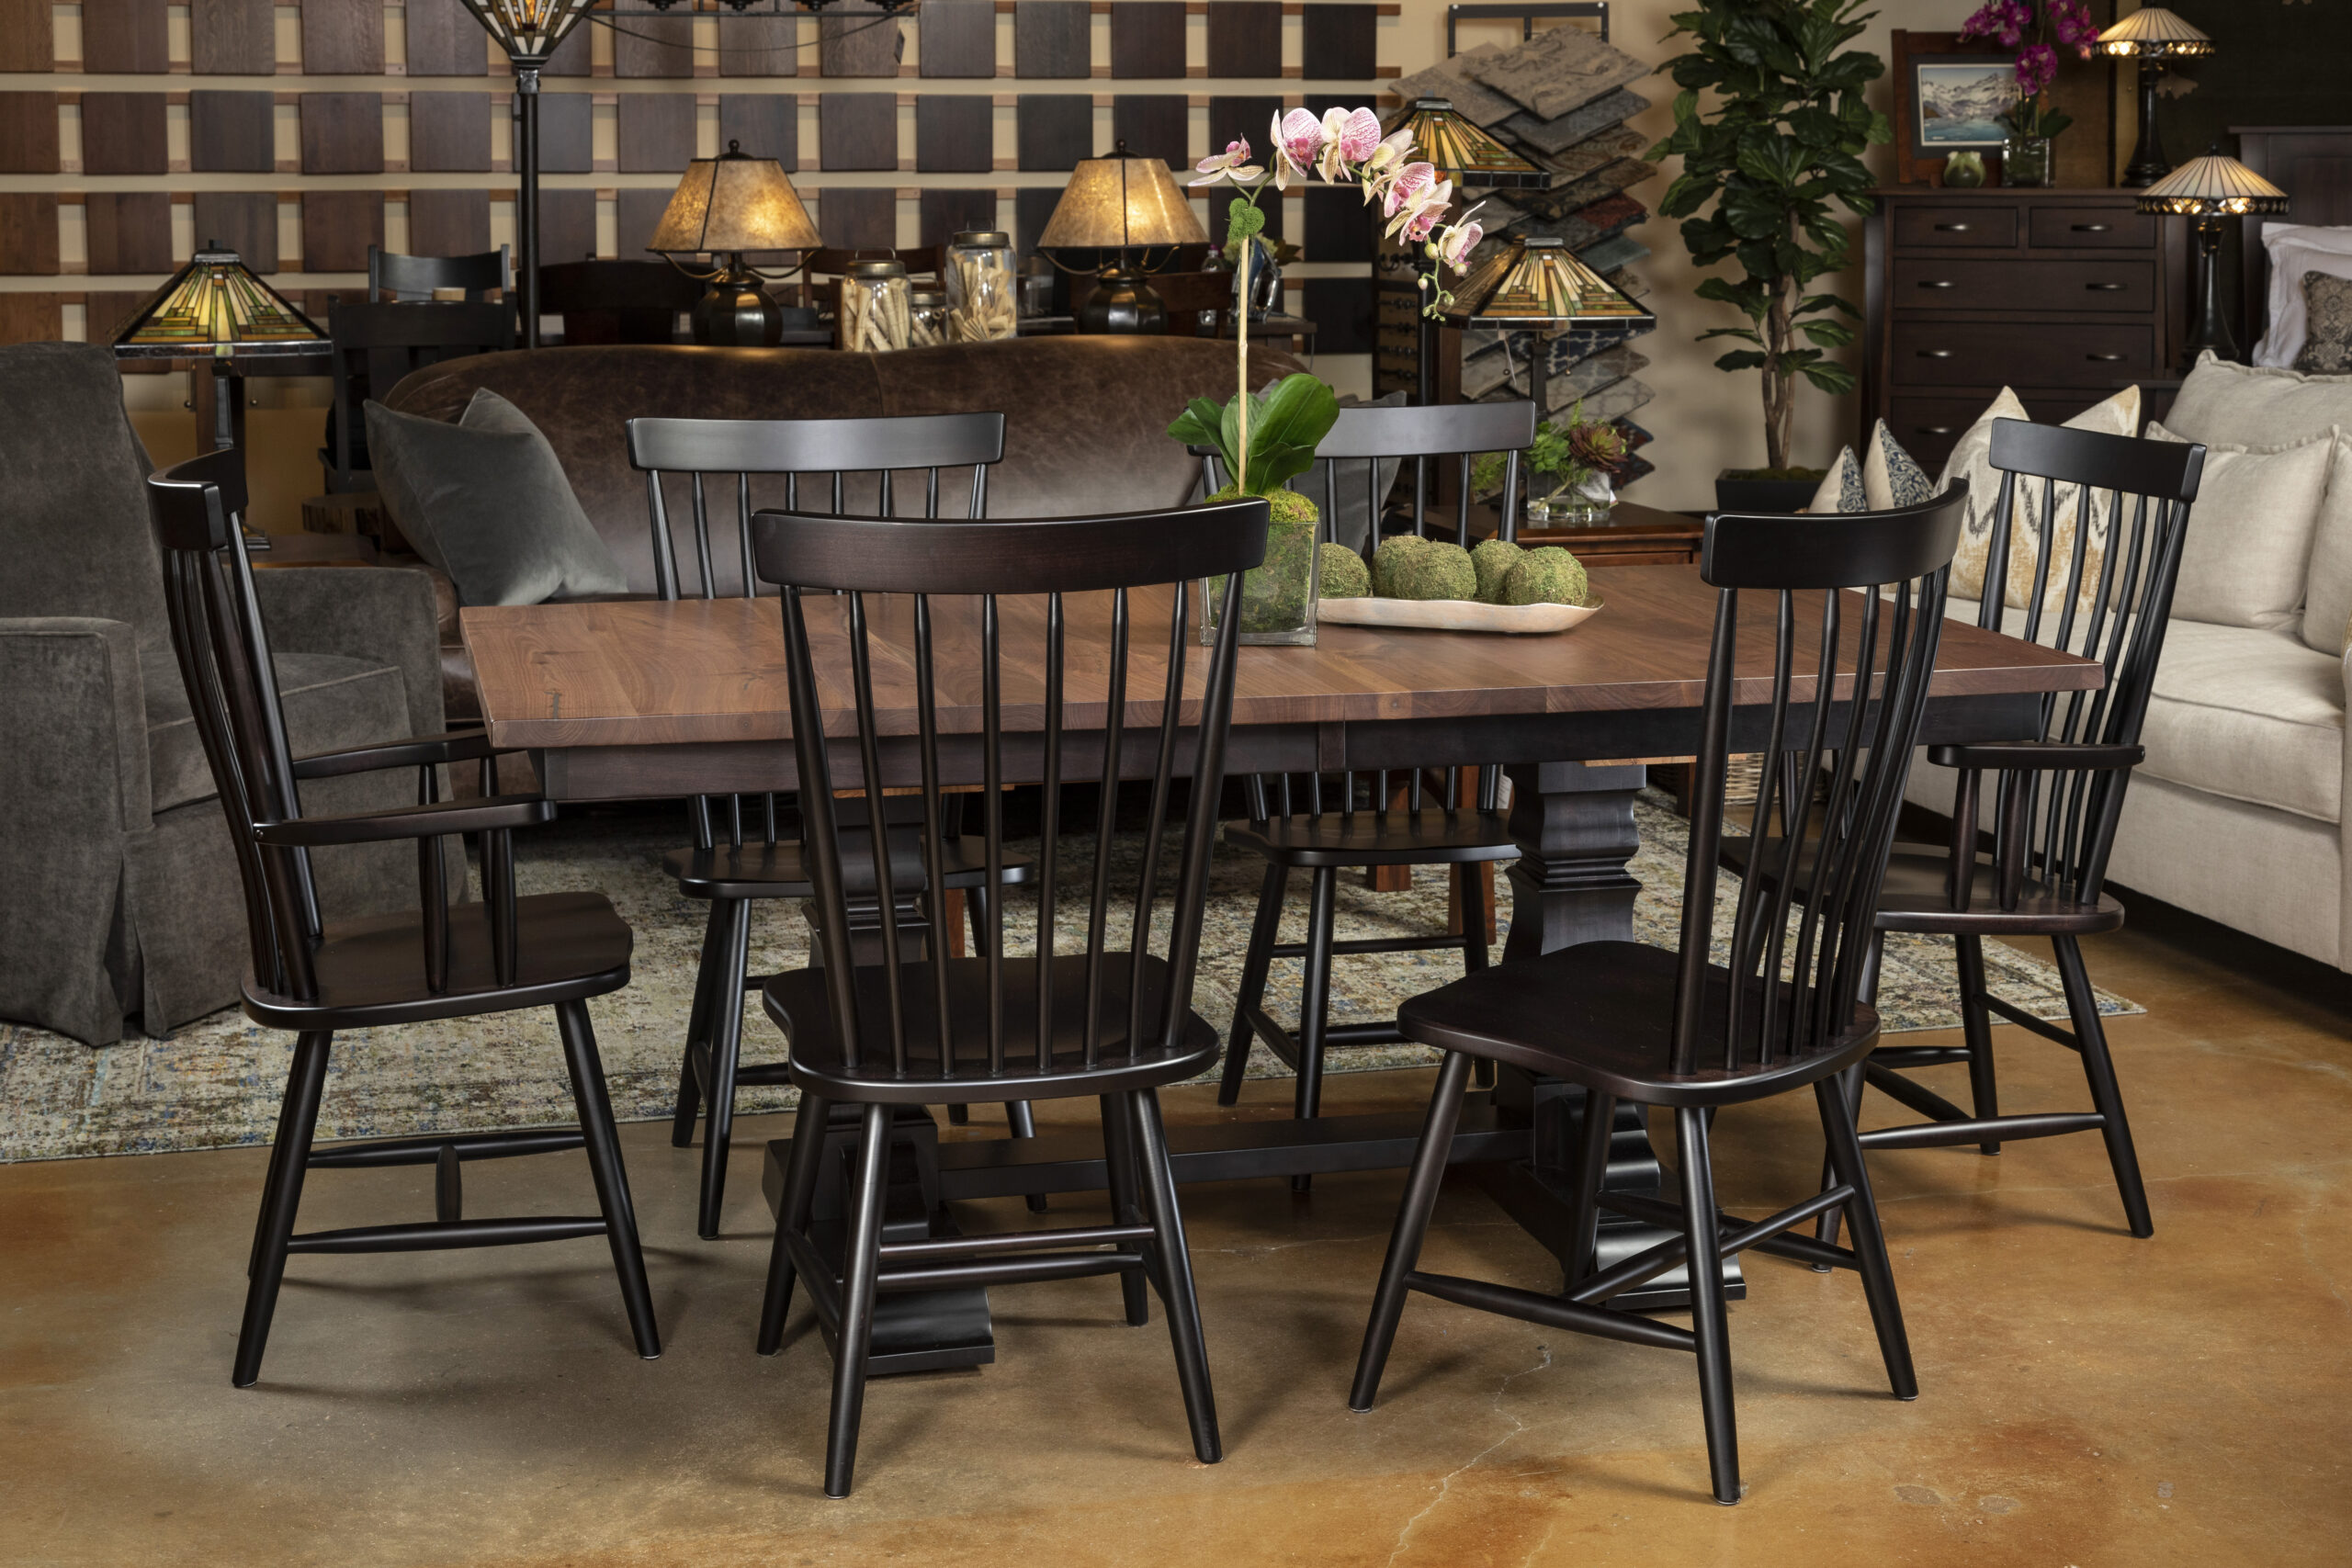 2 Tone Dining Set with Black Shaker Style Chairs